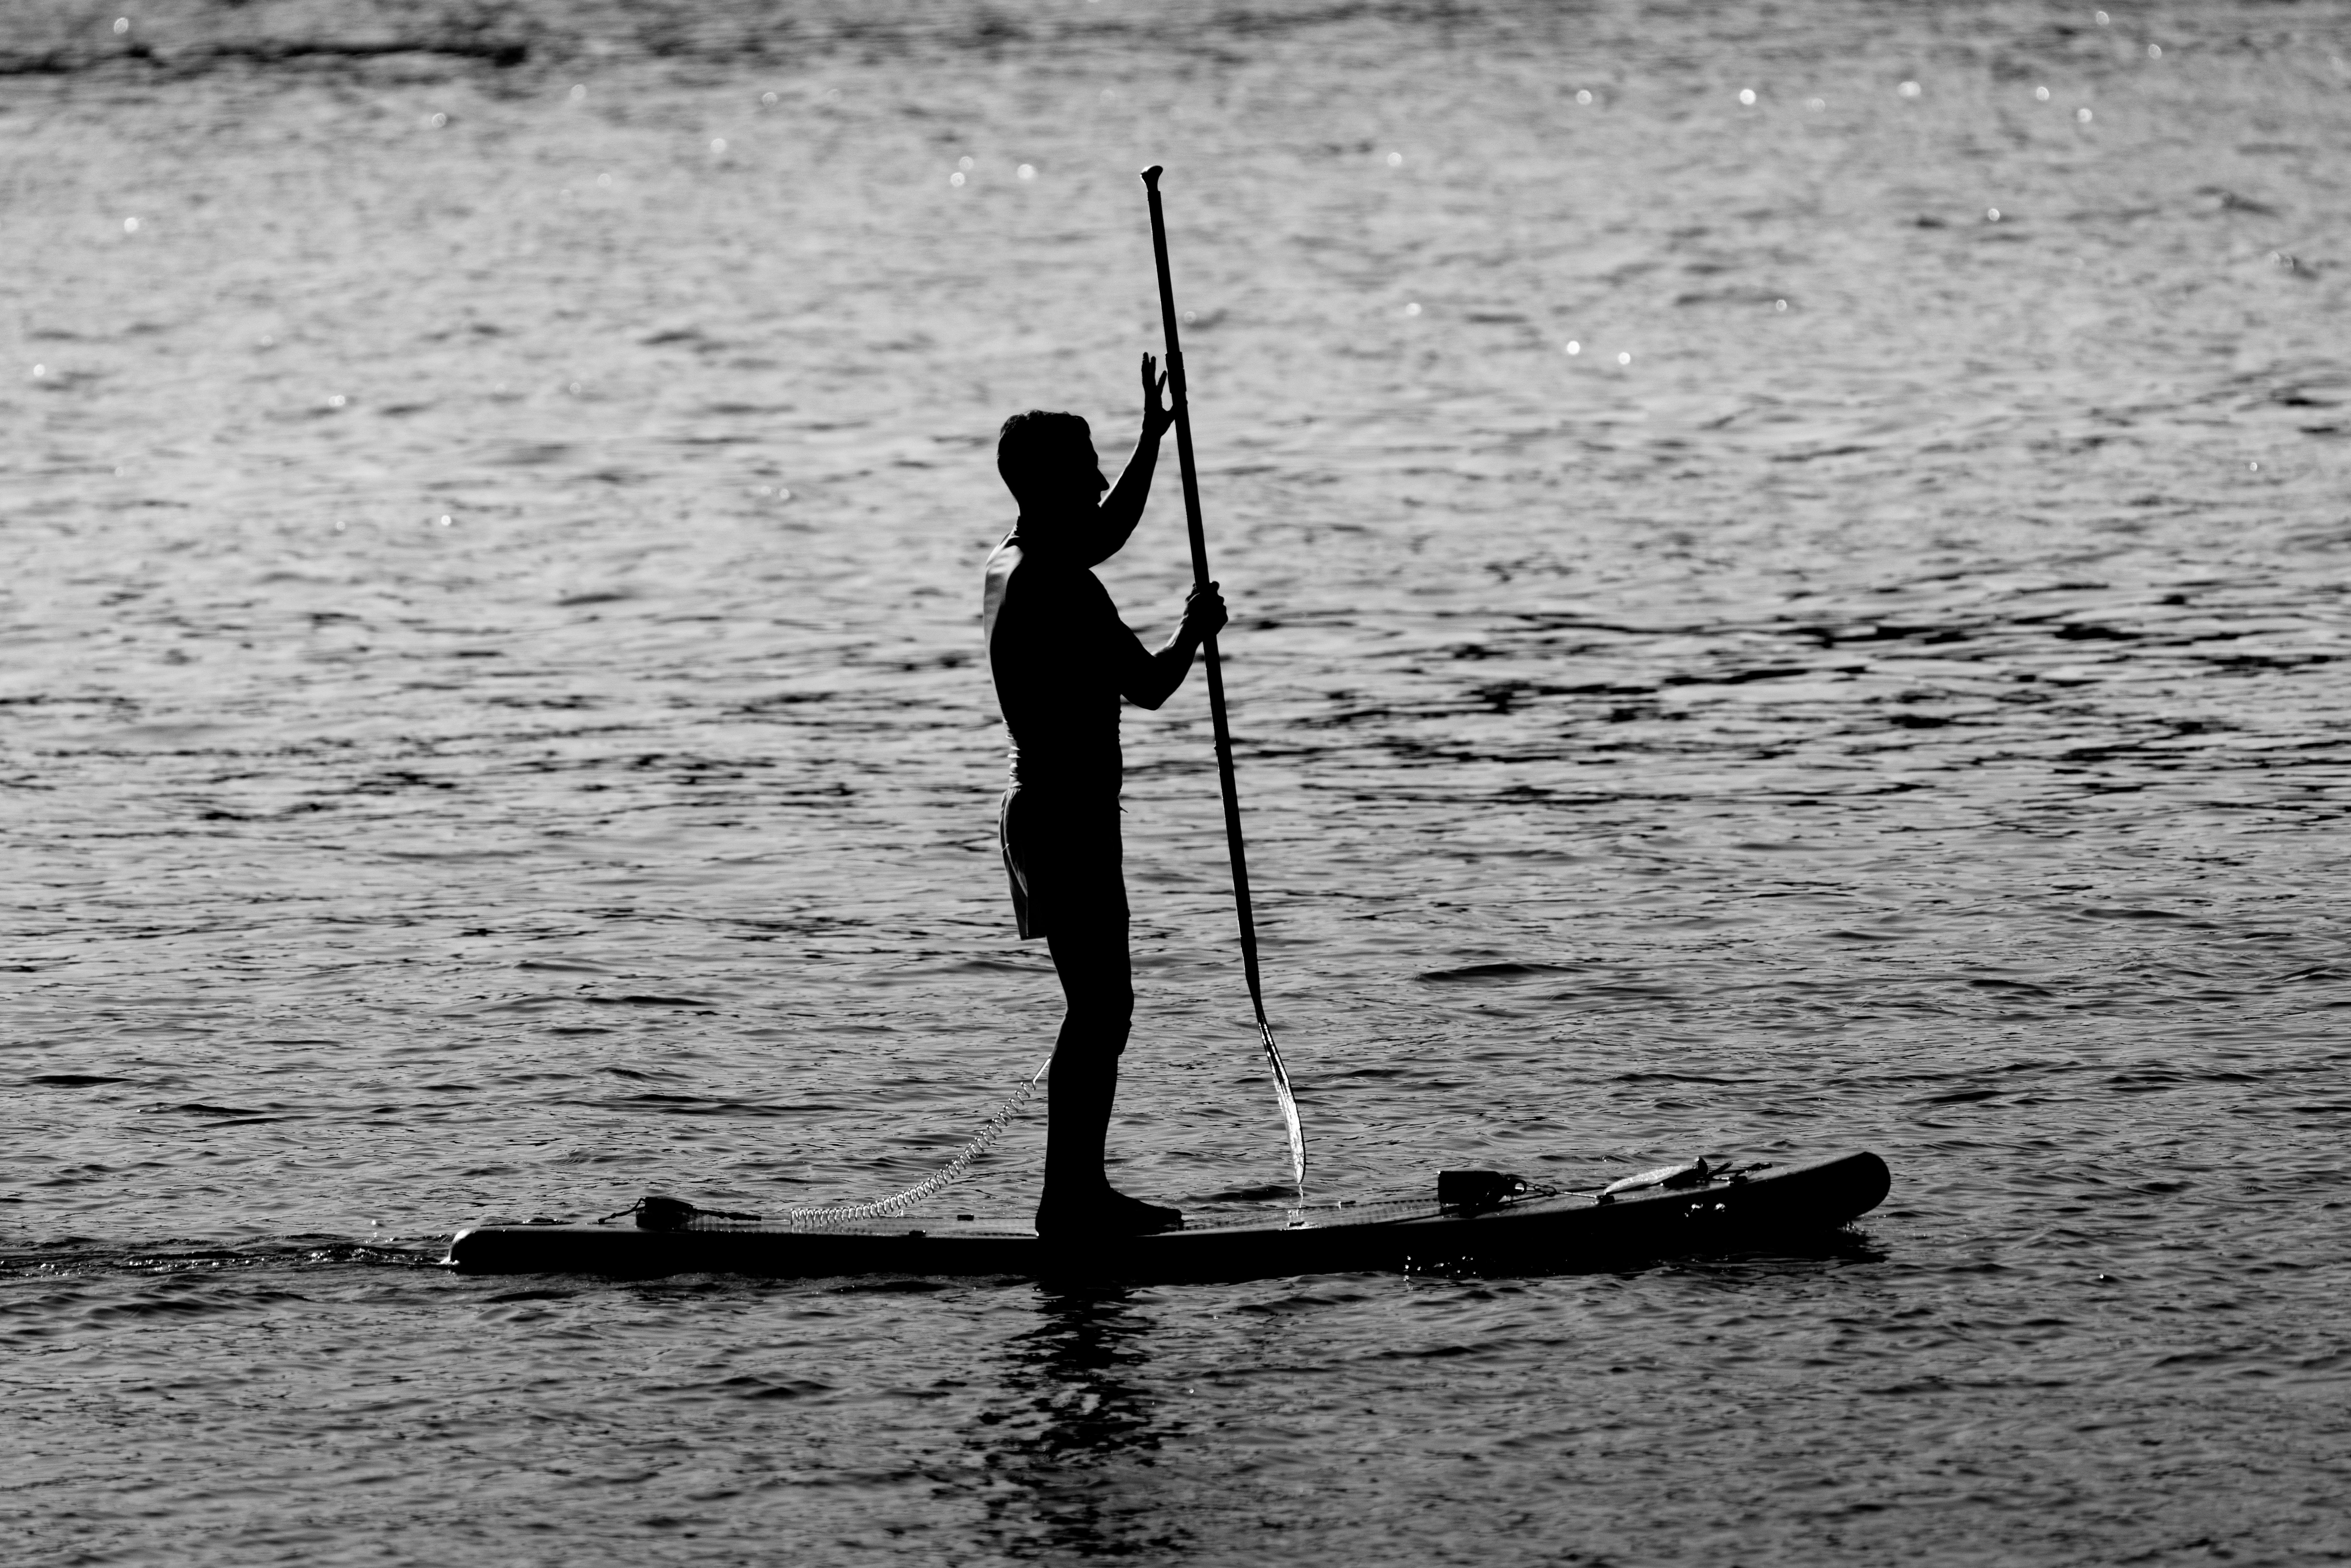 grayscale photo of a man standing on a paddleboard